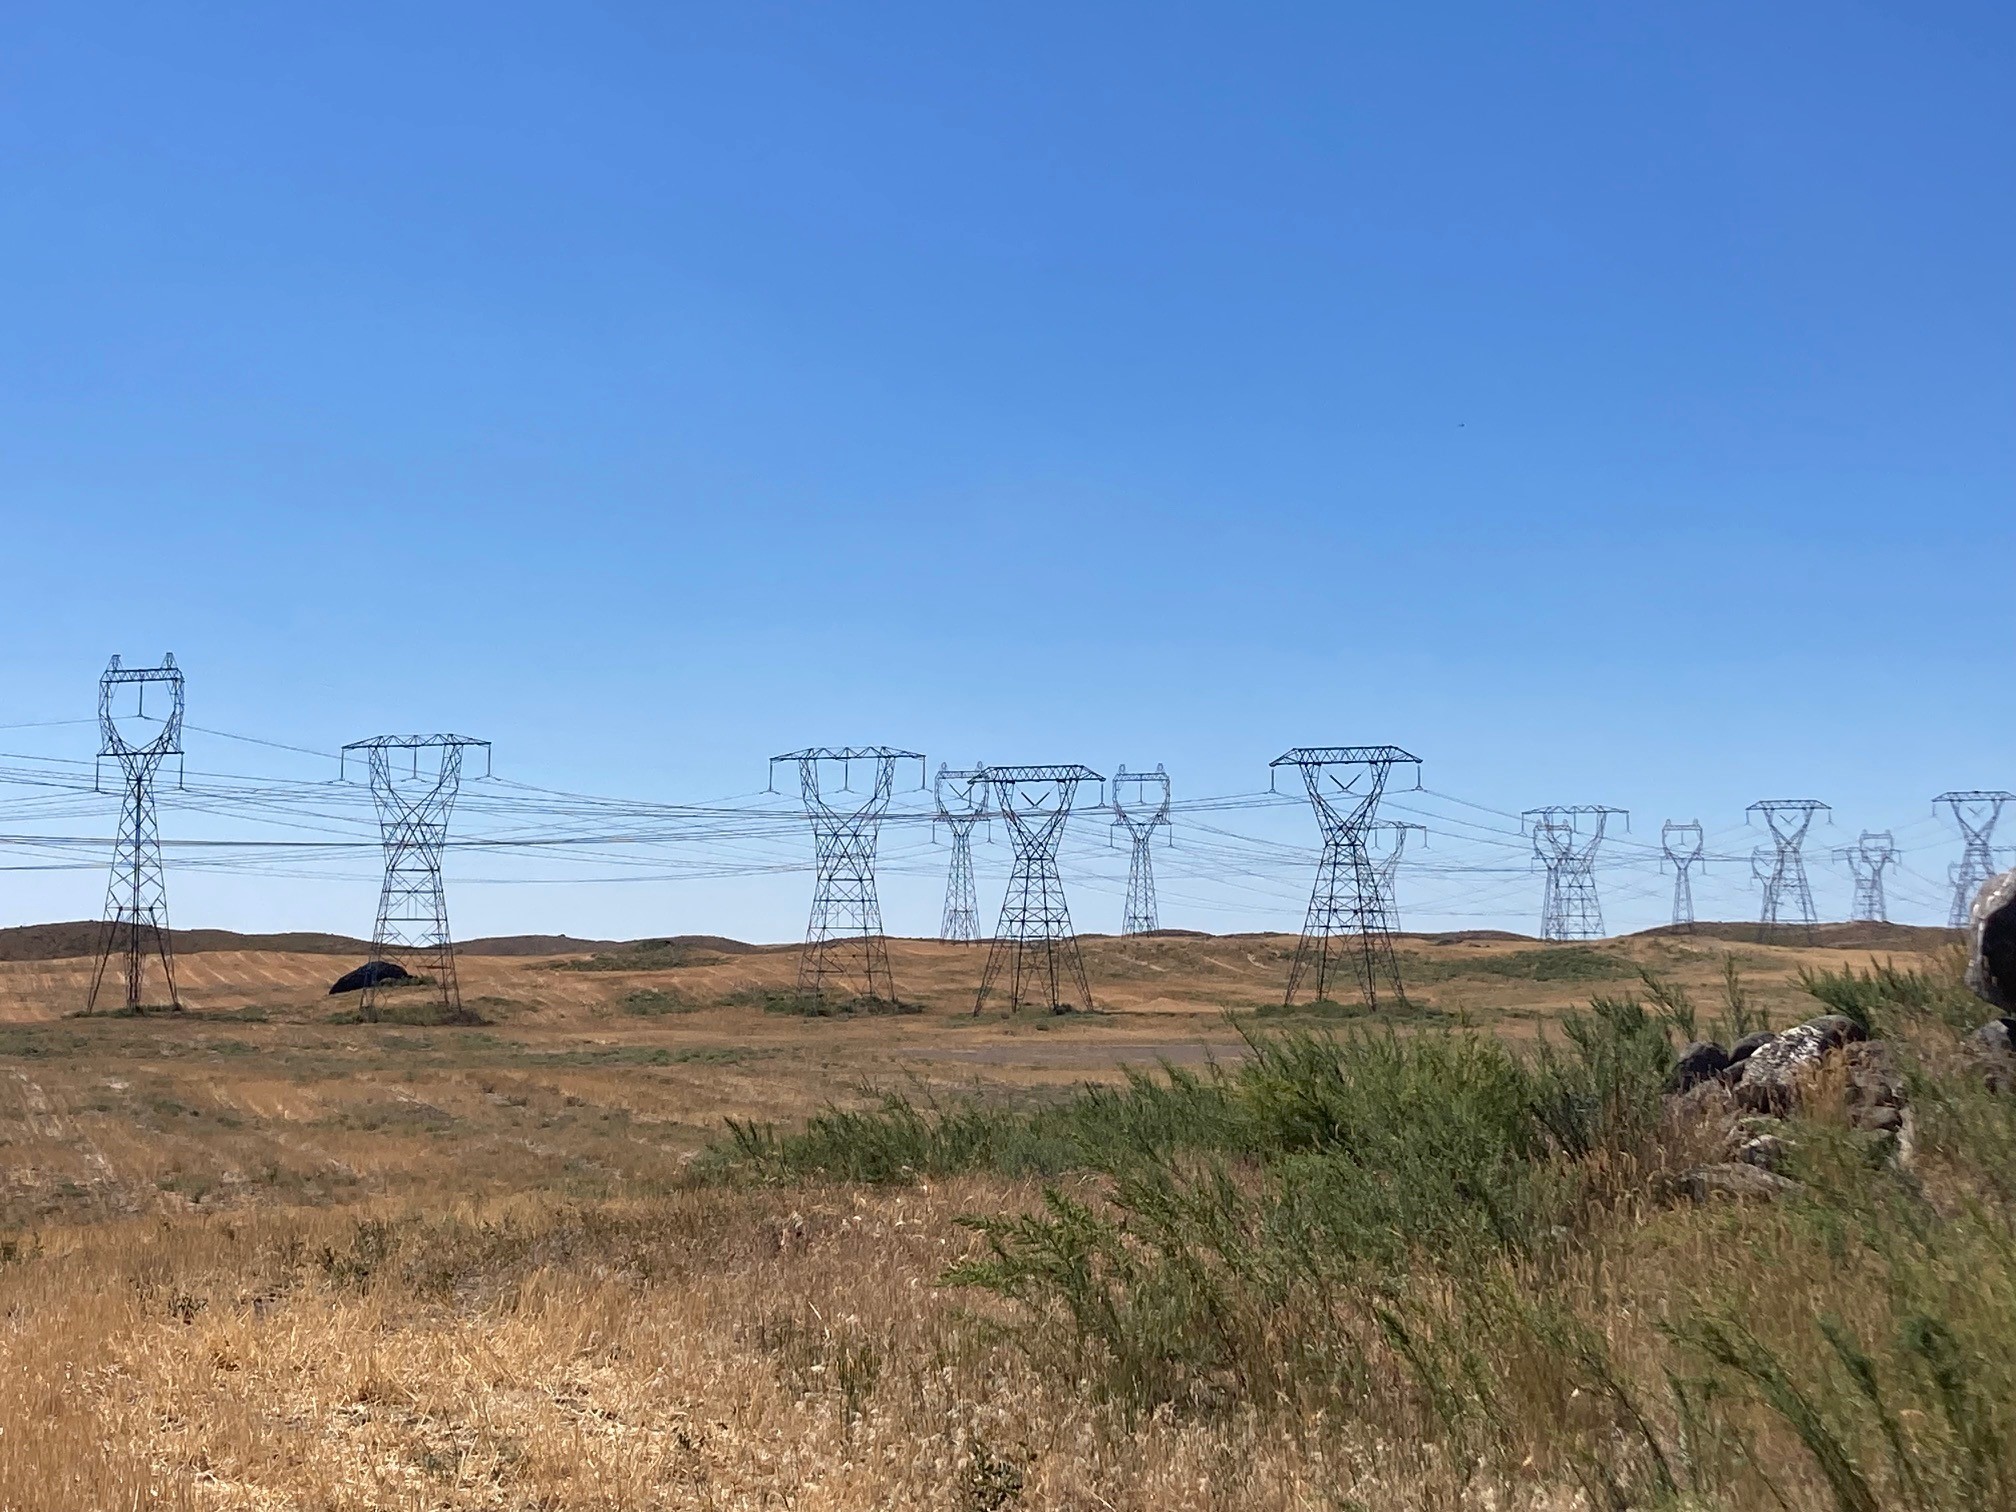 Photo of transmission lines on a clear day over dry fields